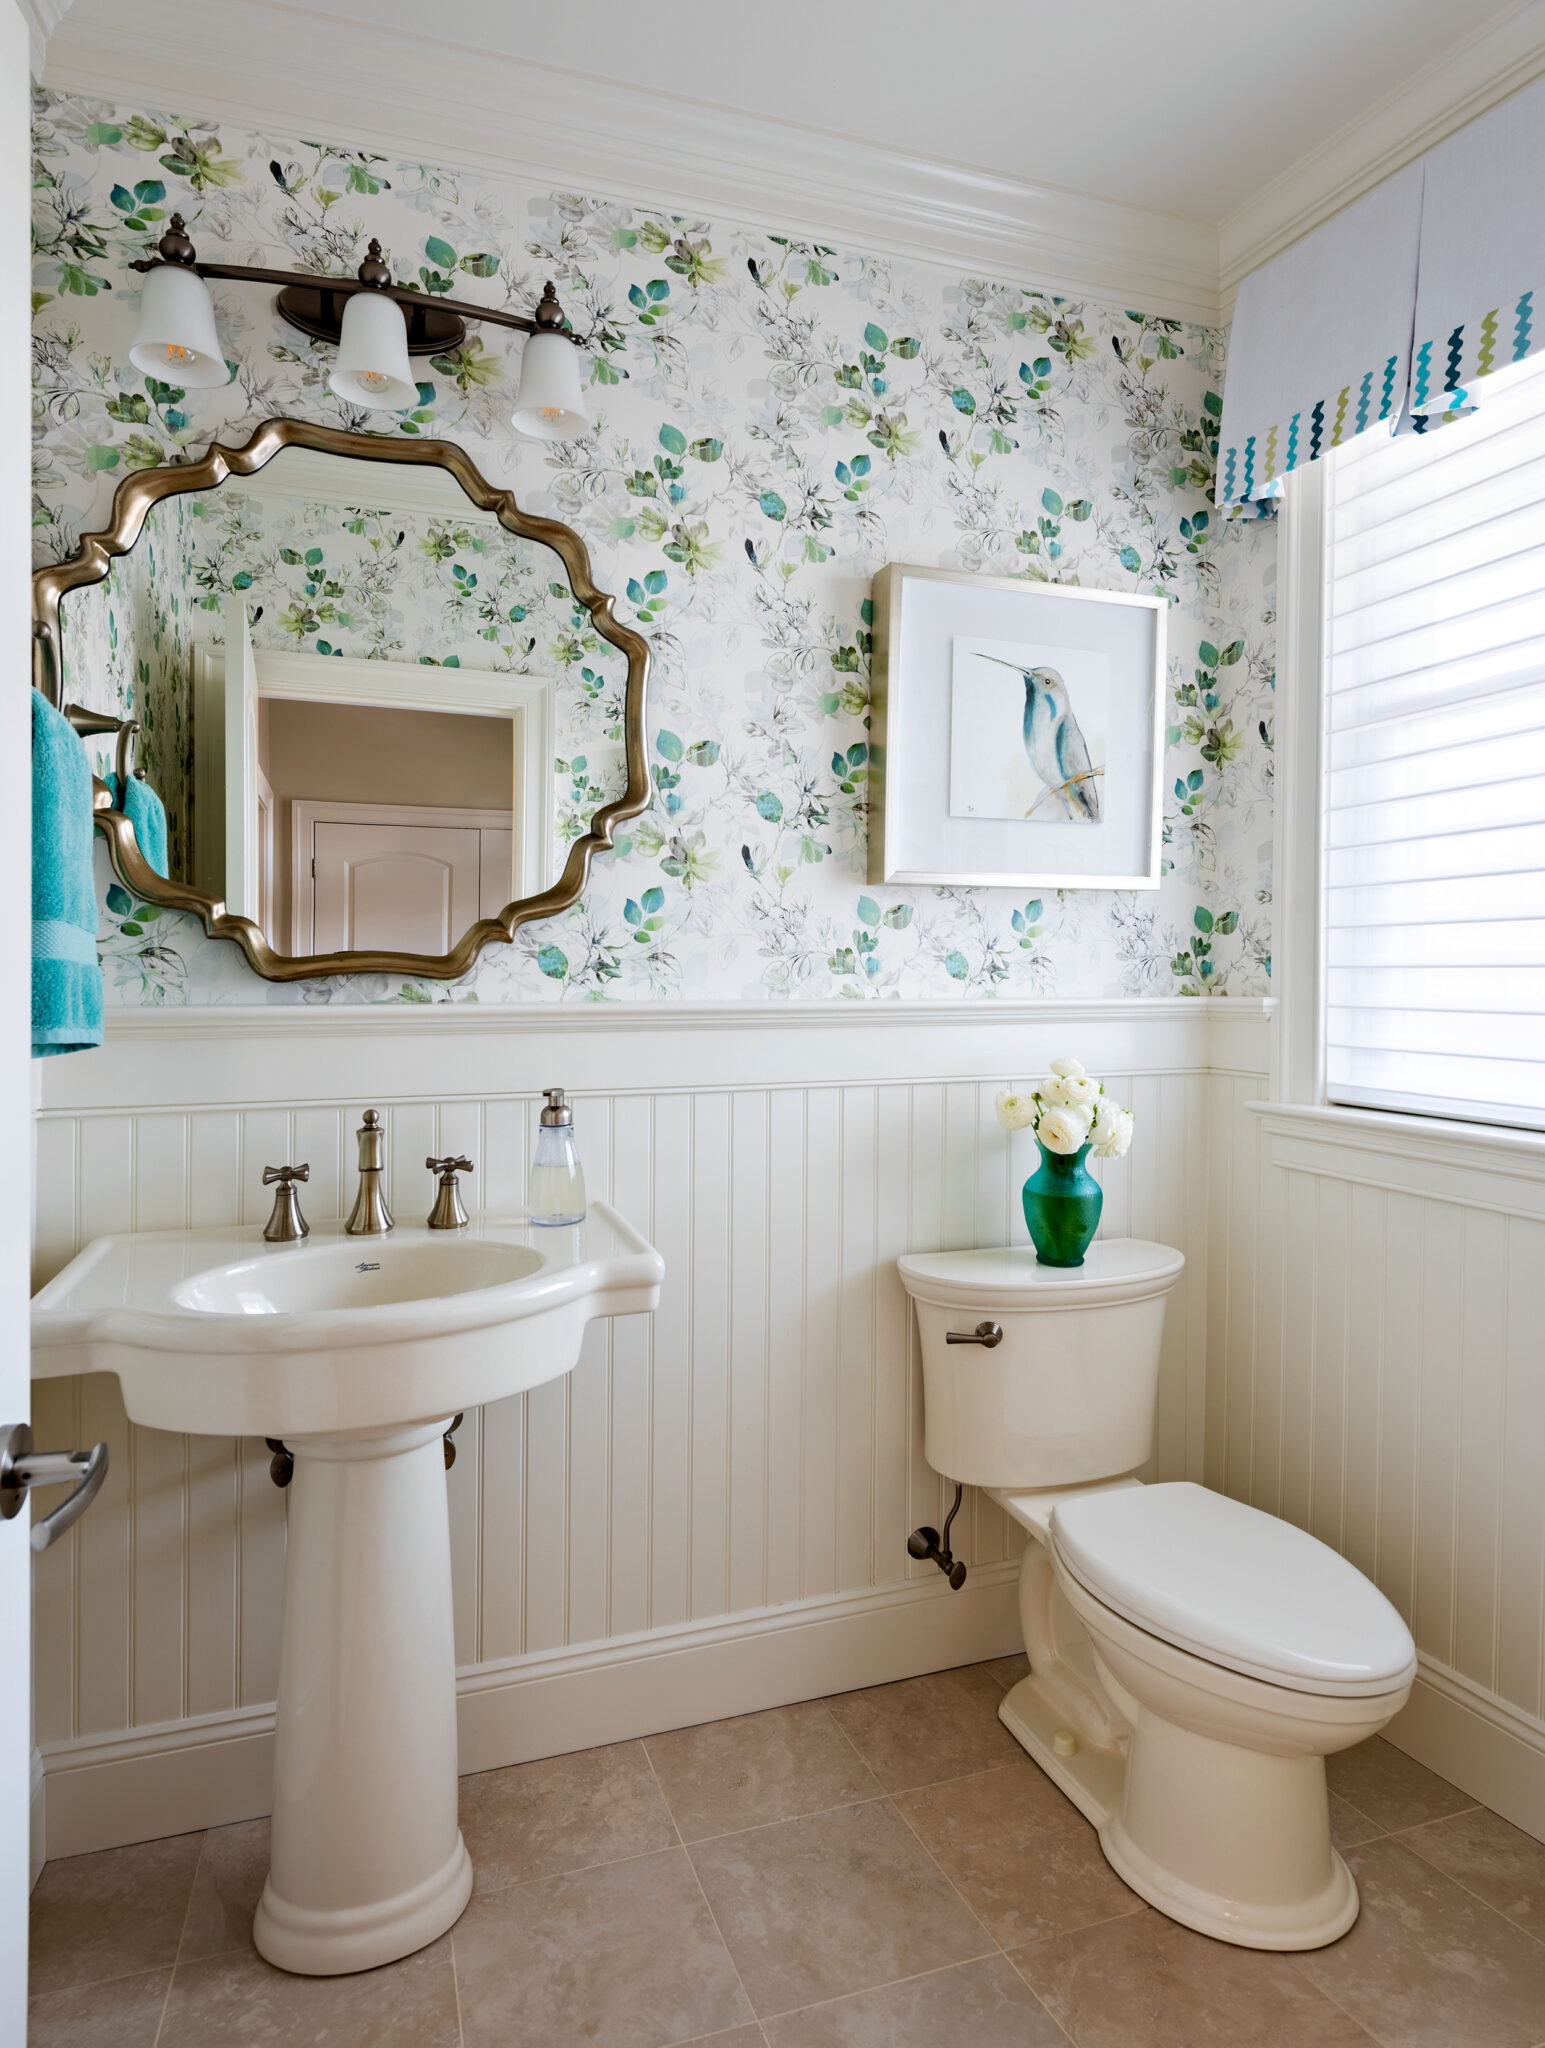 How to make your small bathroom seem luxurious